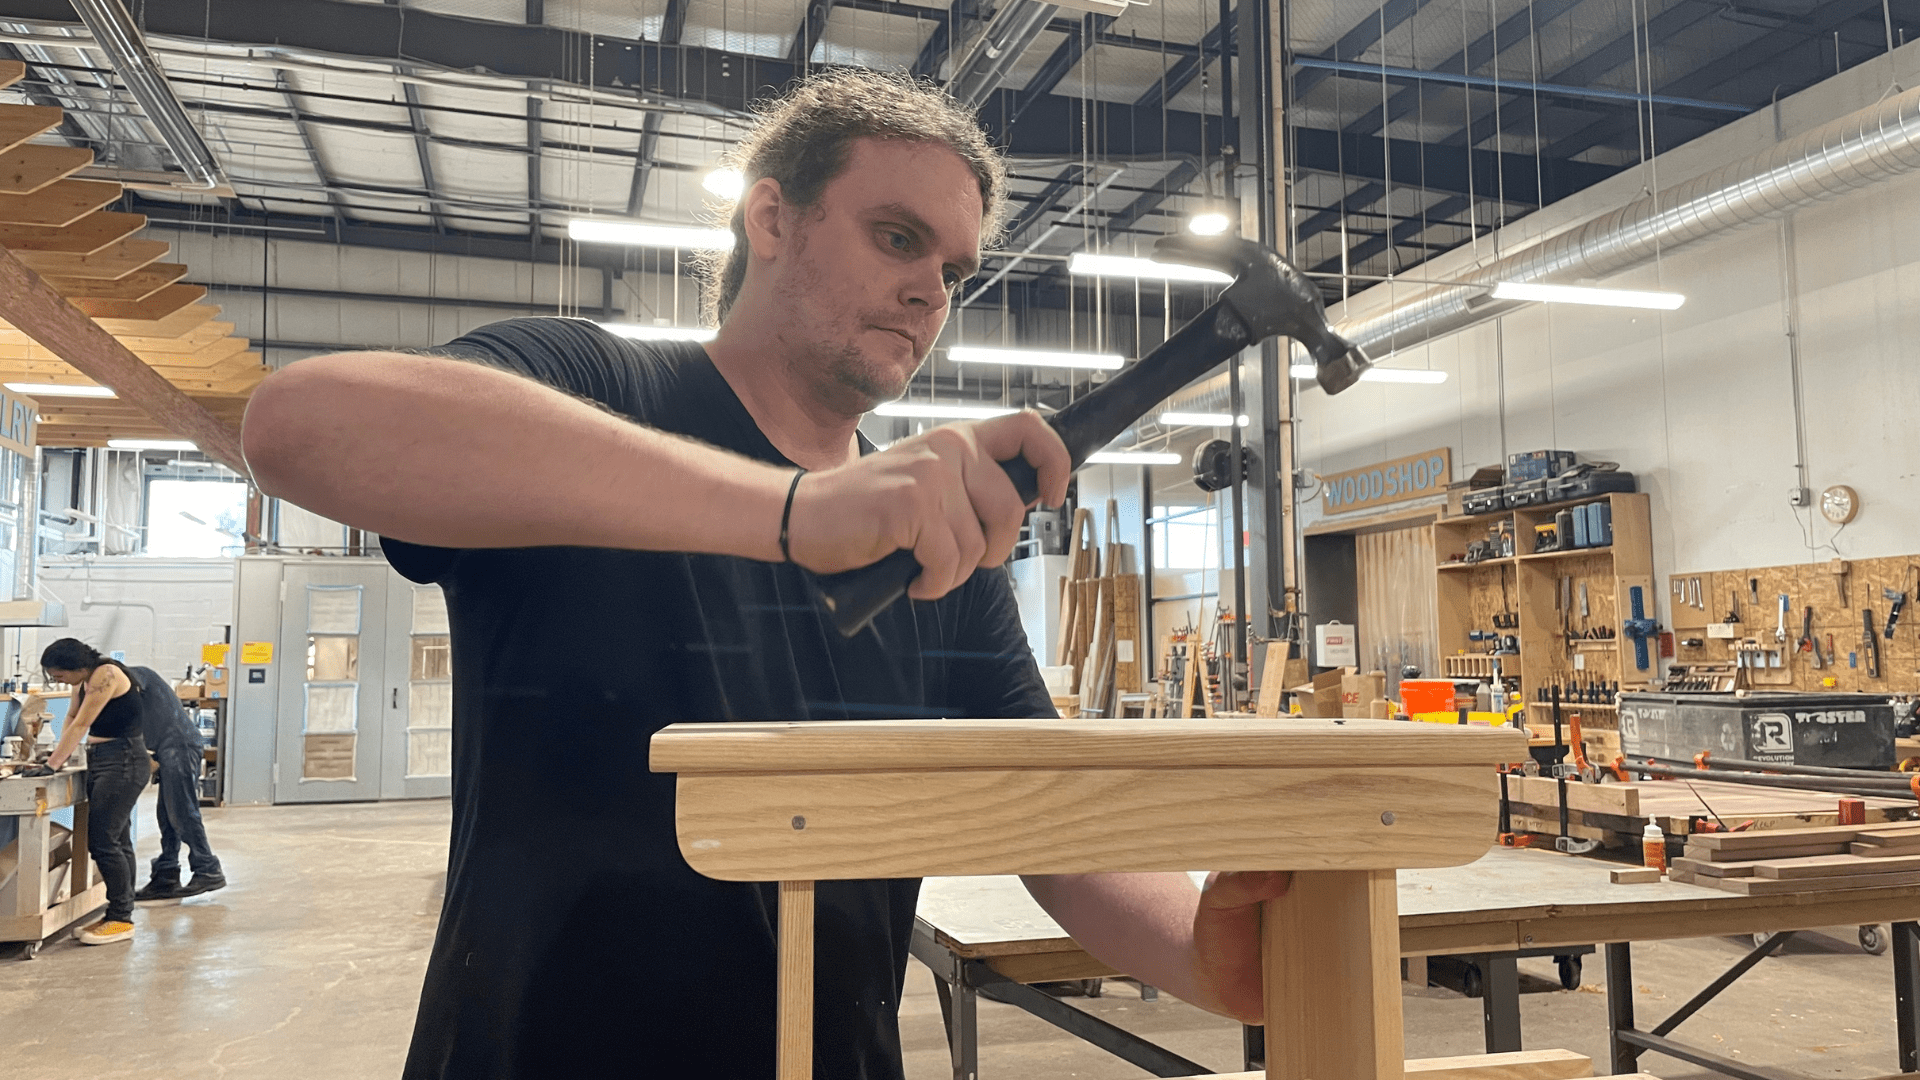 Design and Fabricate a Wooden Bench: Plan, Process, Assemble, and Finishing Wood